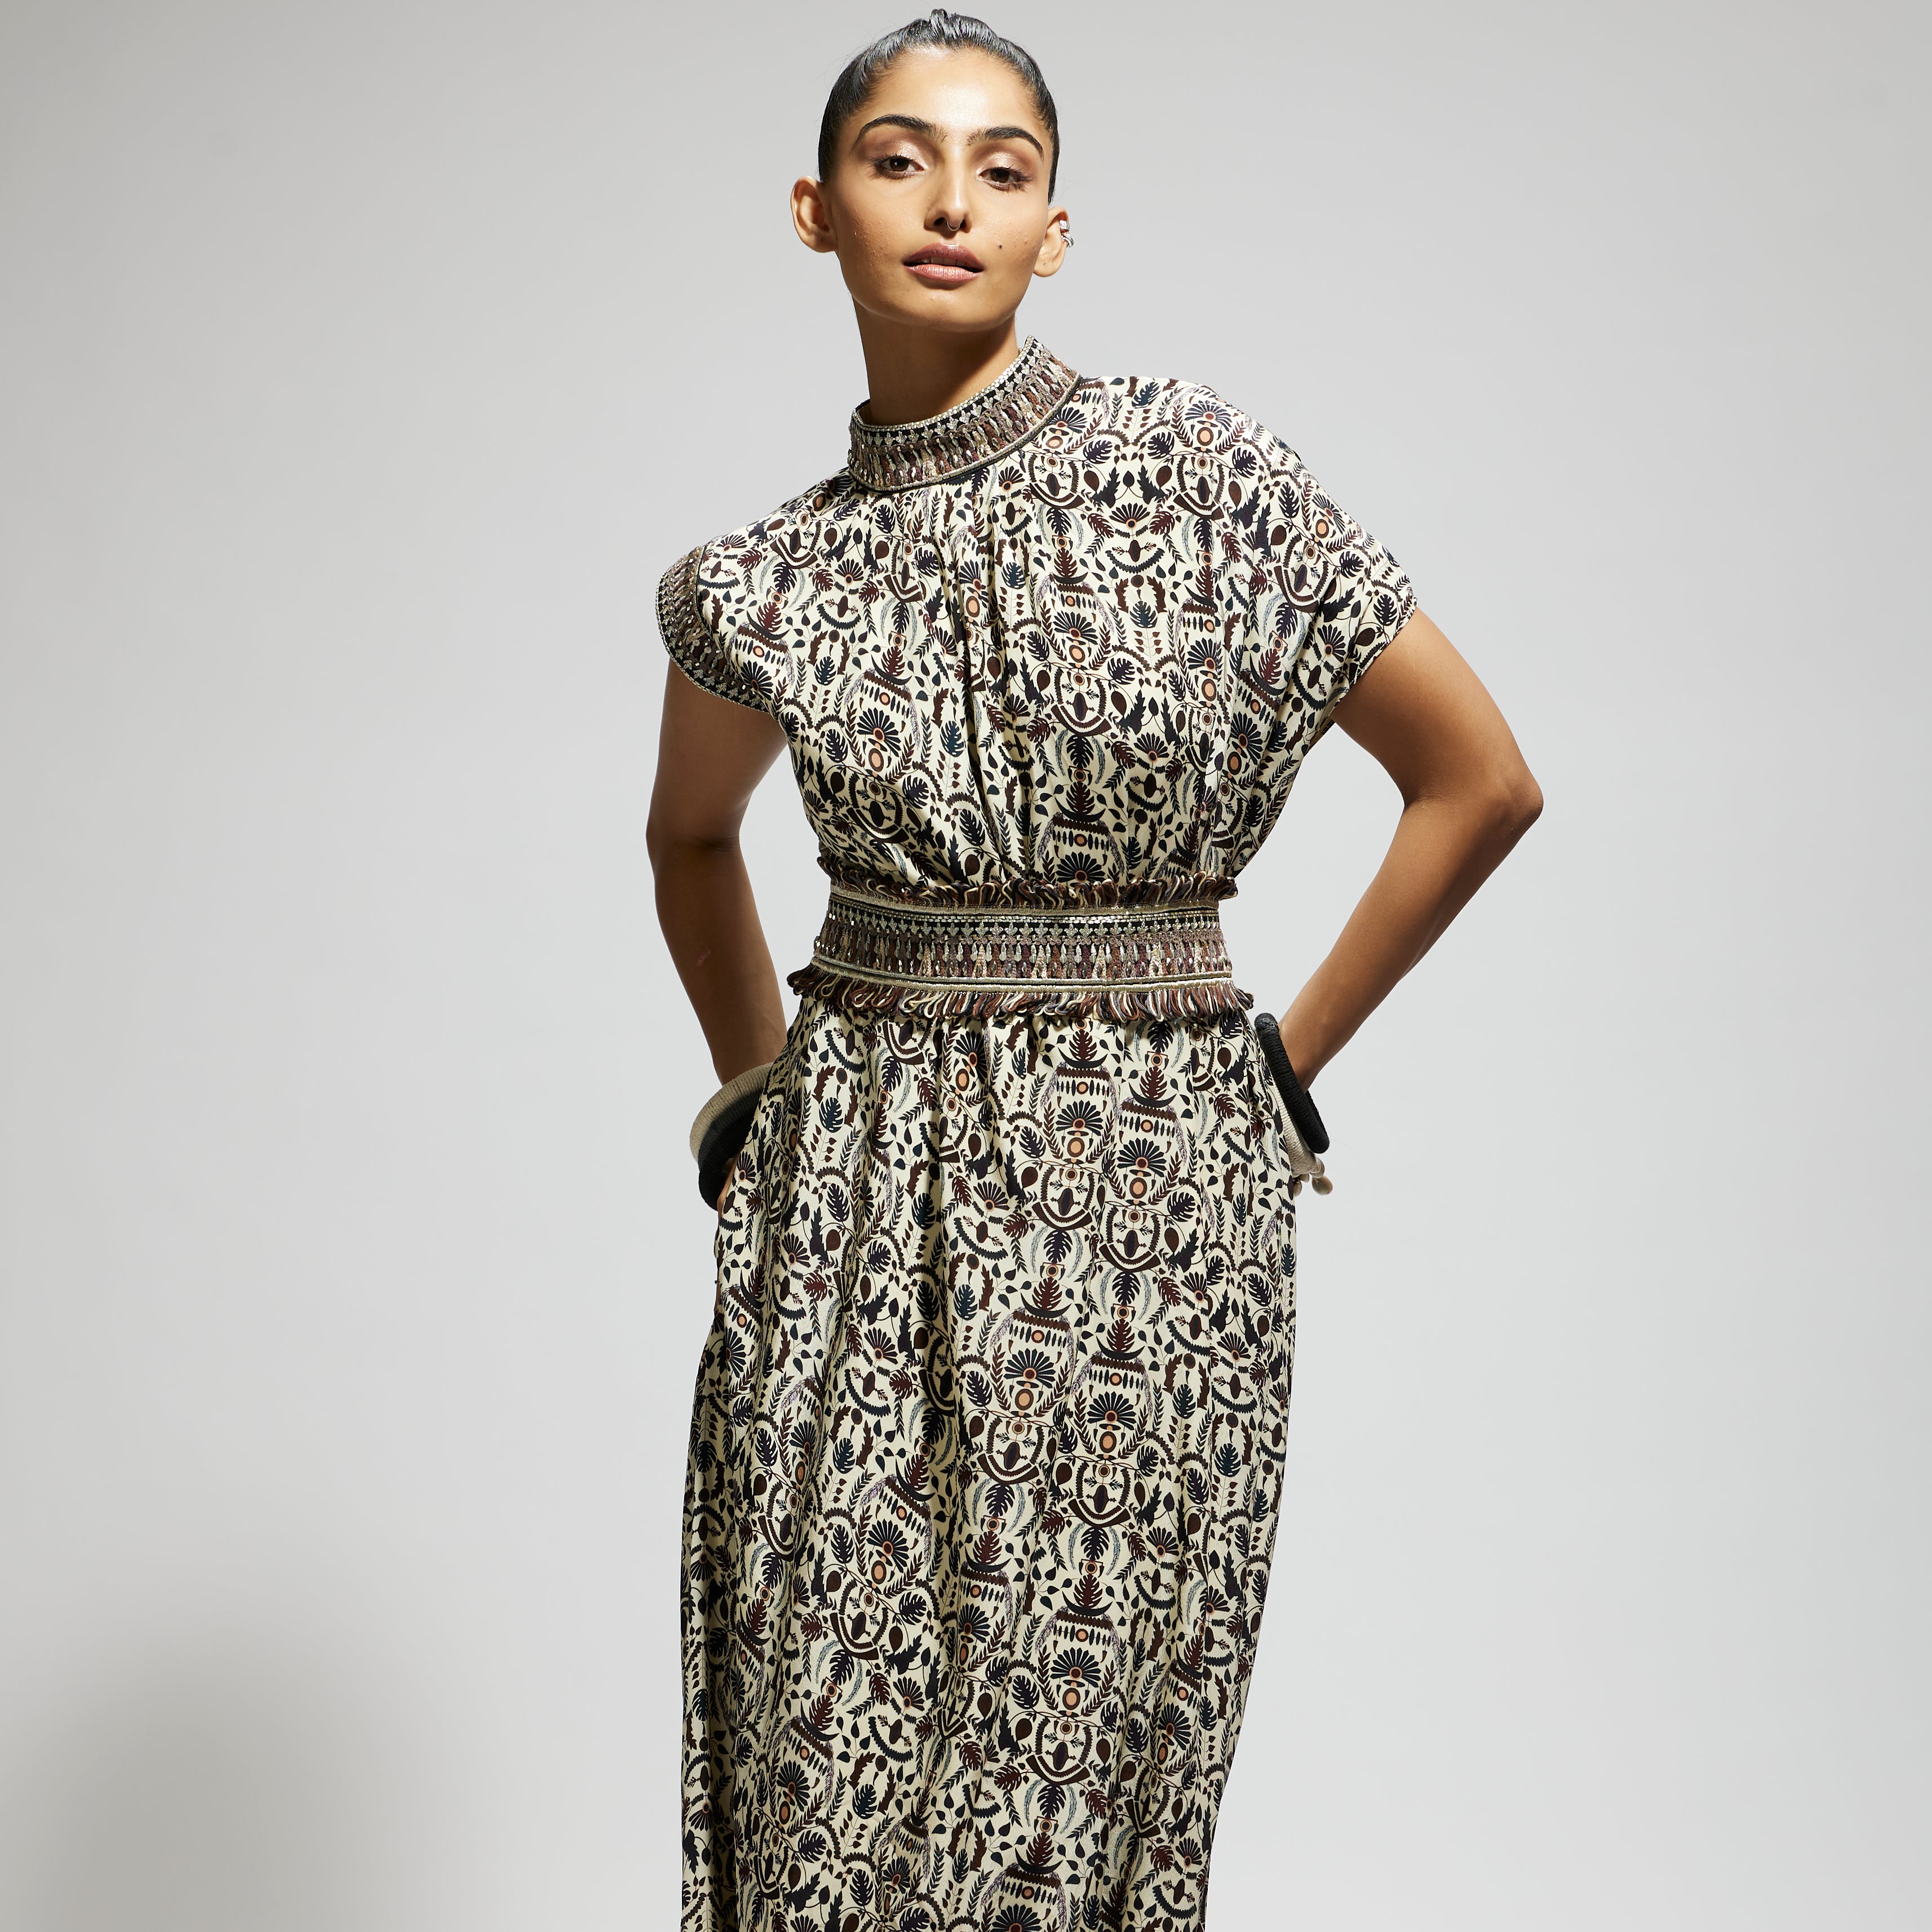 WHITE LEAF JAAL PRINTED COWL DRESS TEAMED WITH A BELT